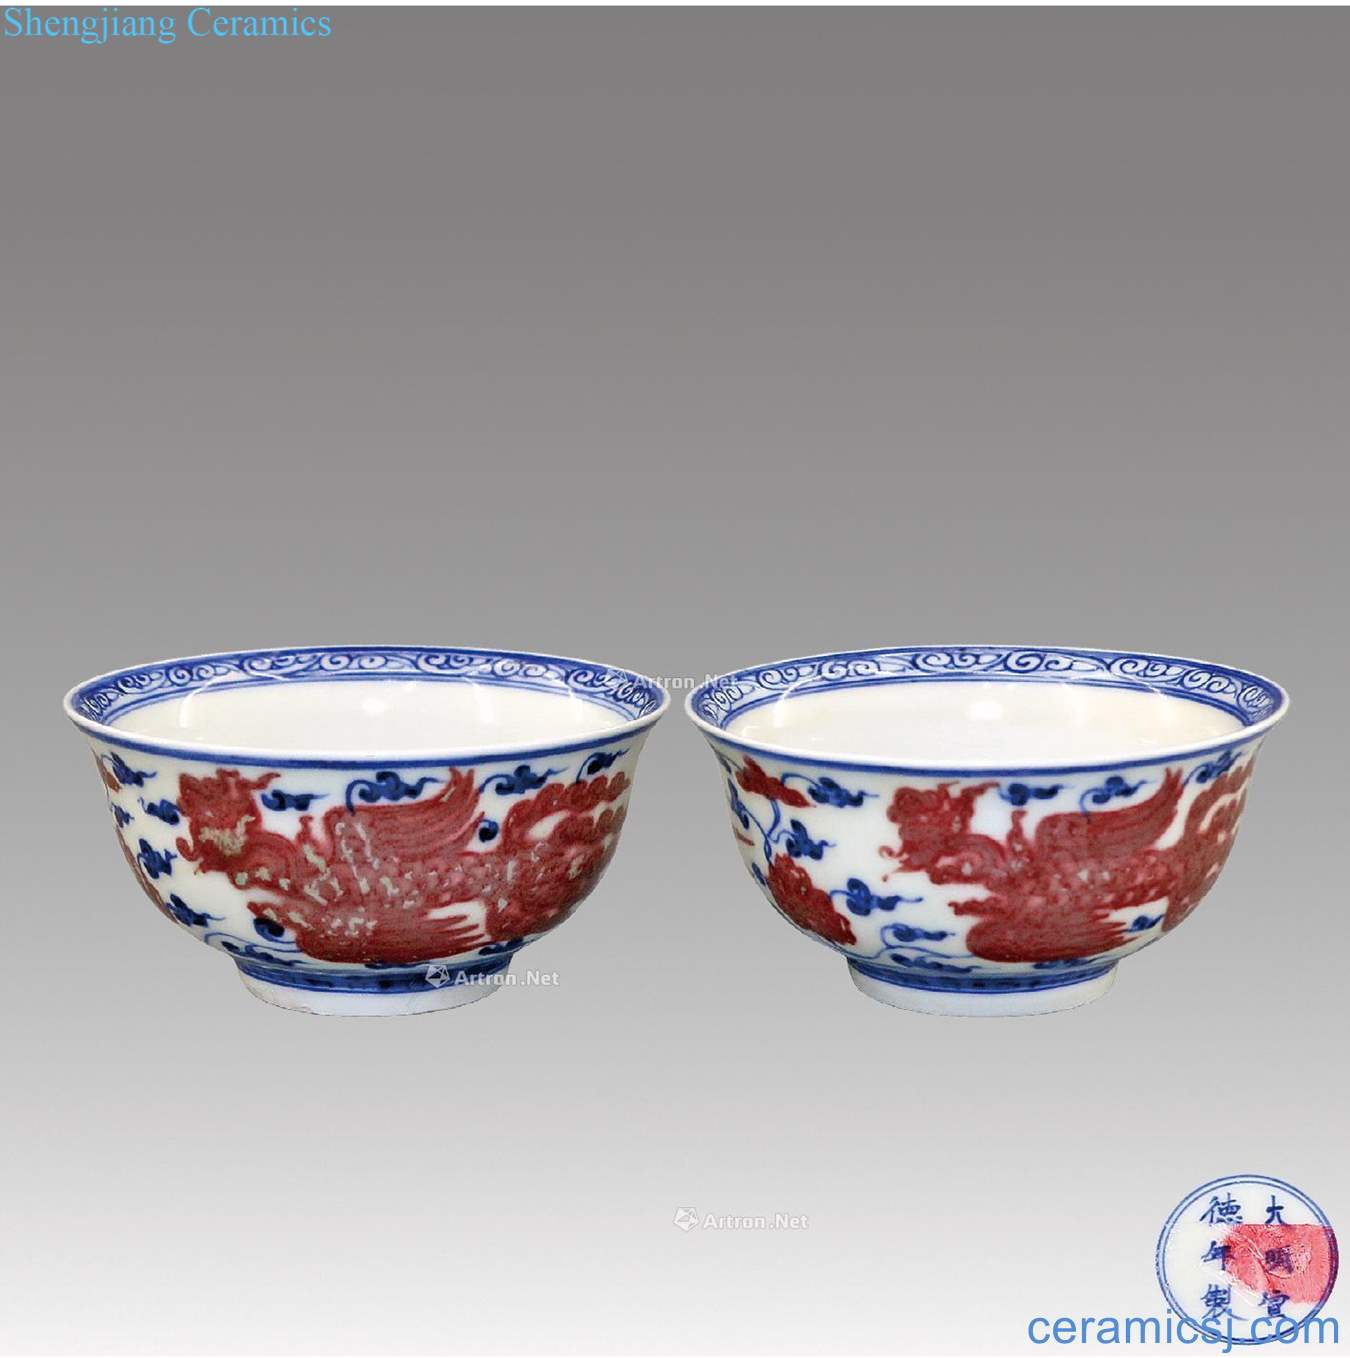 Xuande blue youligong chicken dishes